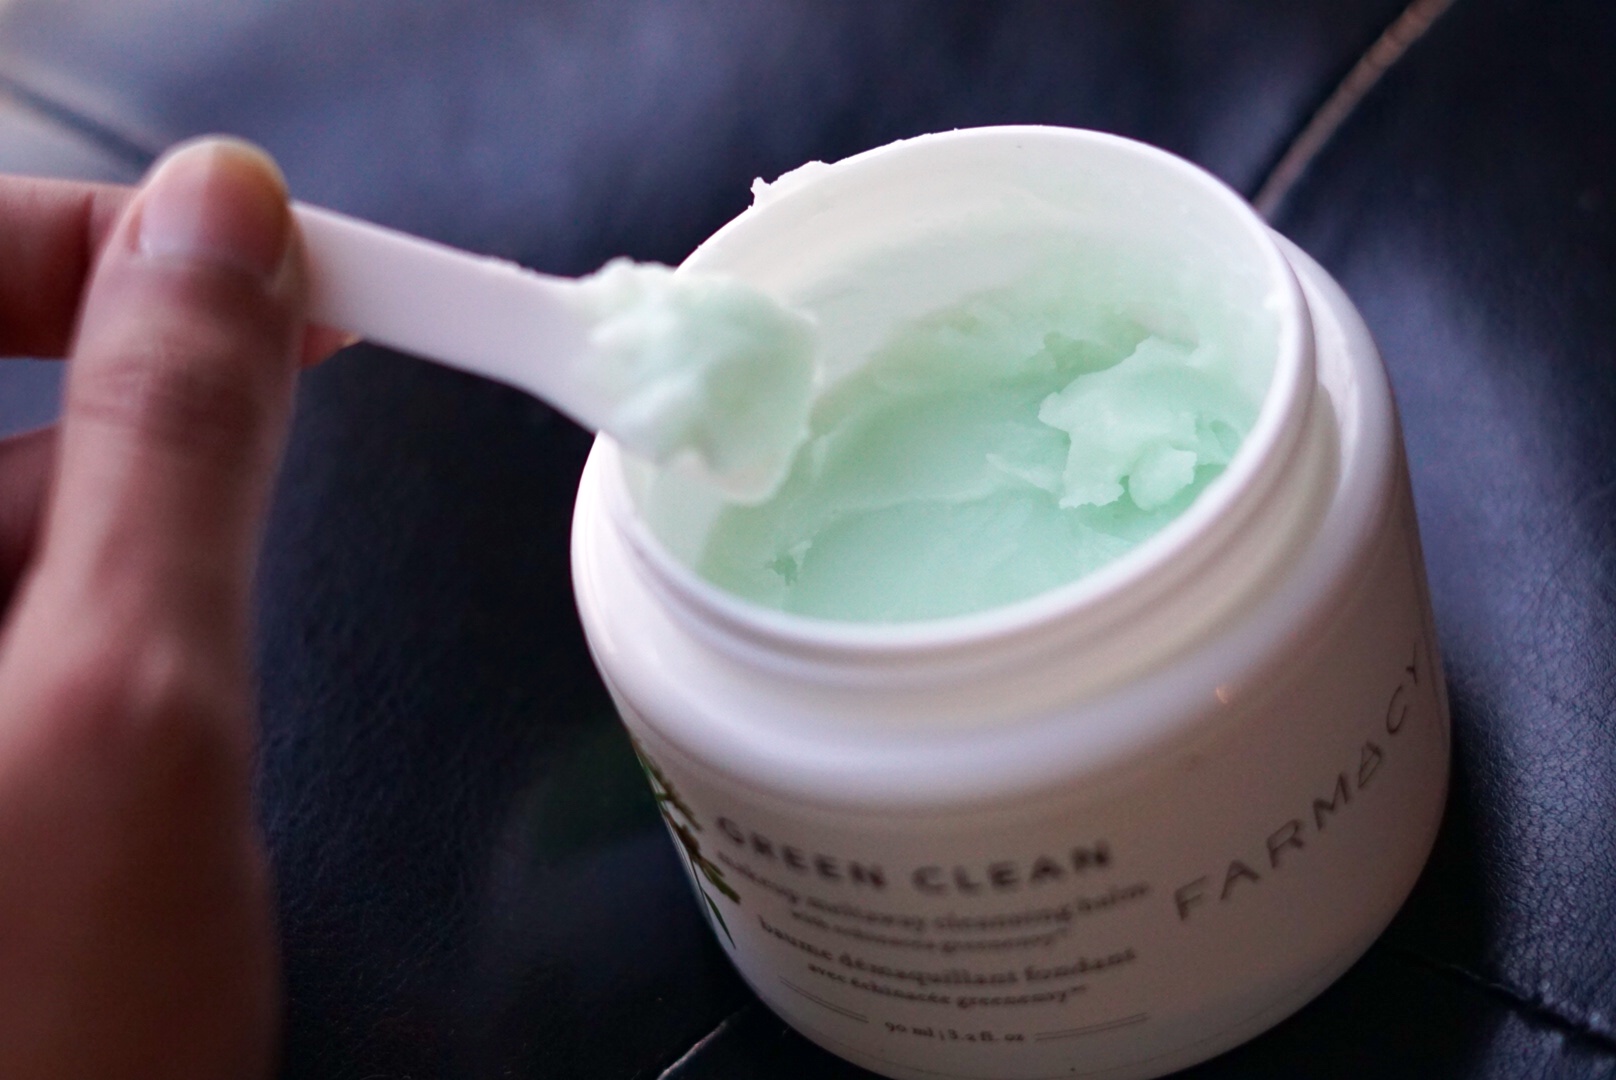 FARMACY Green Clean Makeup Removing Cleansing Balm texture